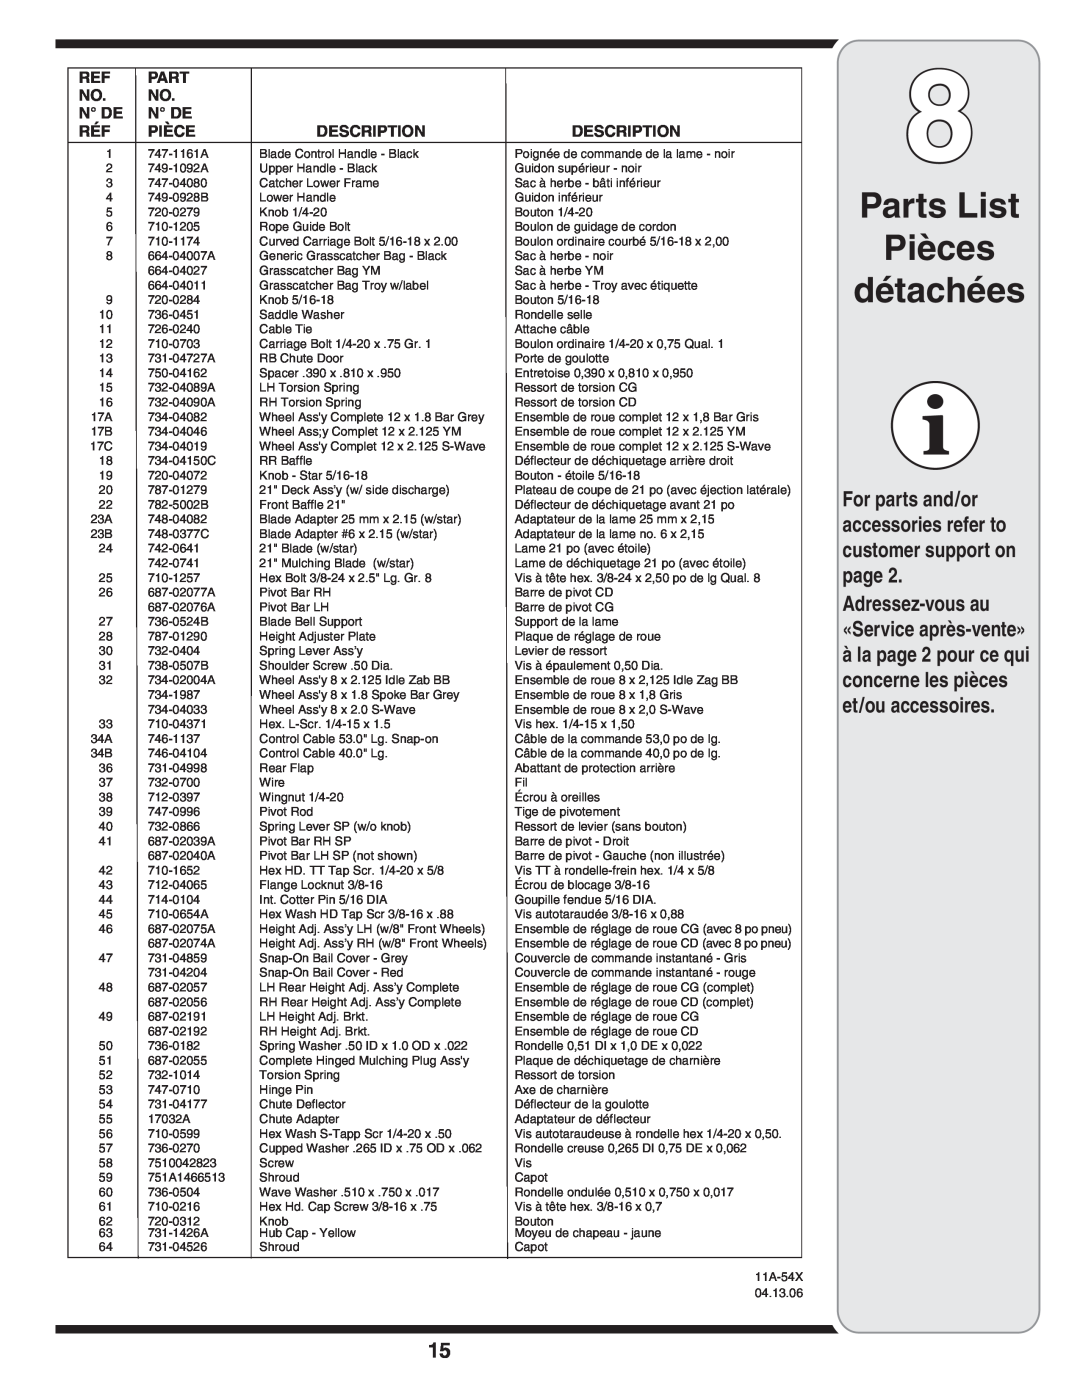 Troy-Bilt 540 Series warranty Parts List Pièces détachées, For parts and/or accessories refer to customer support on page 